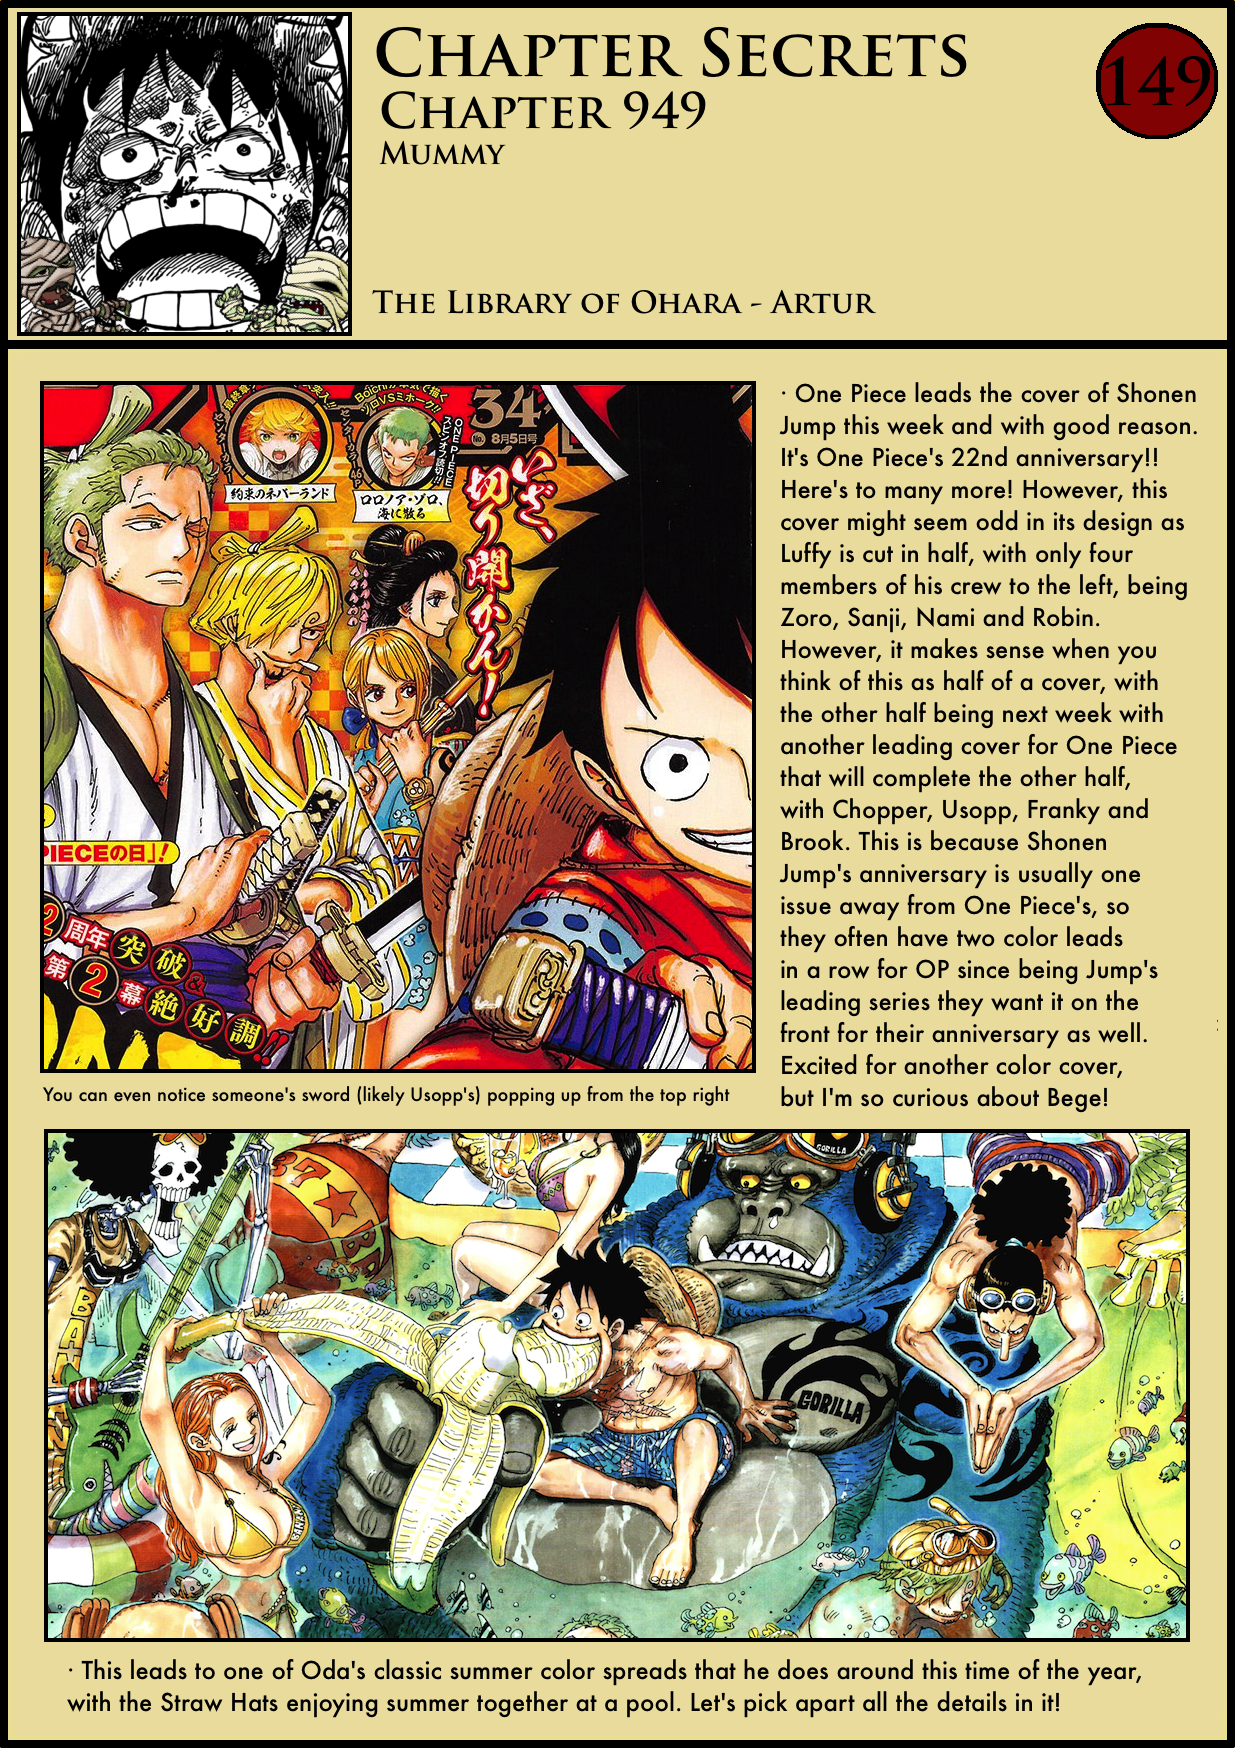 Chapter Secrets Chapter 949 In Depth Analysis The Library Of Ohara